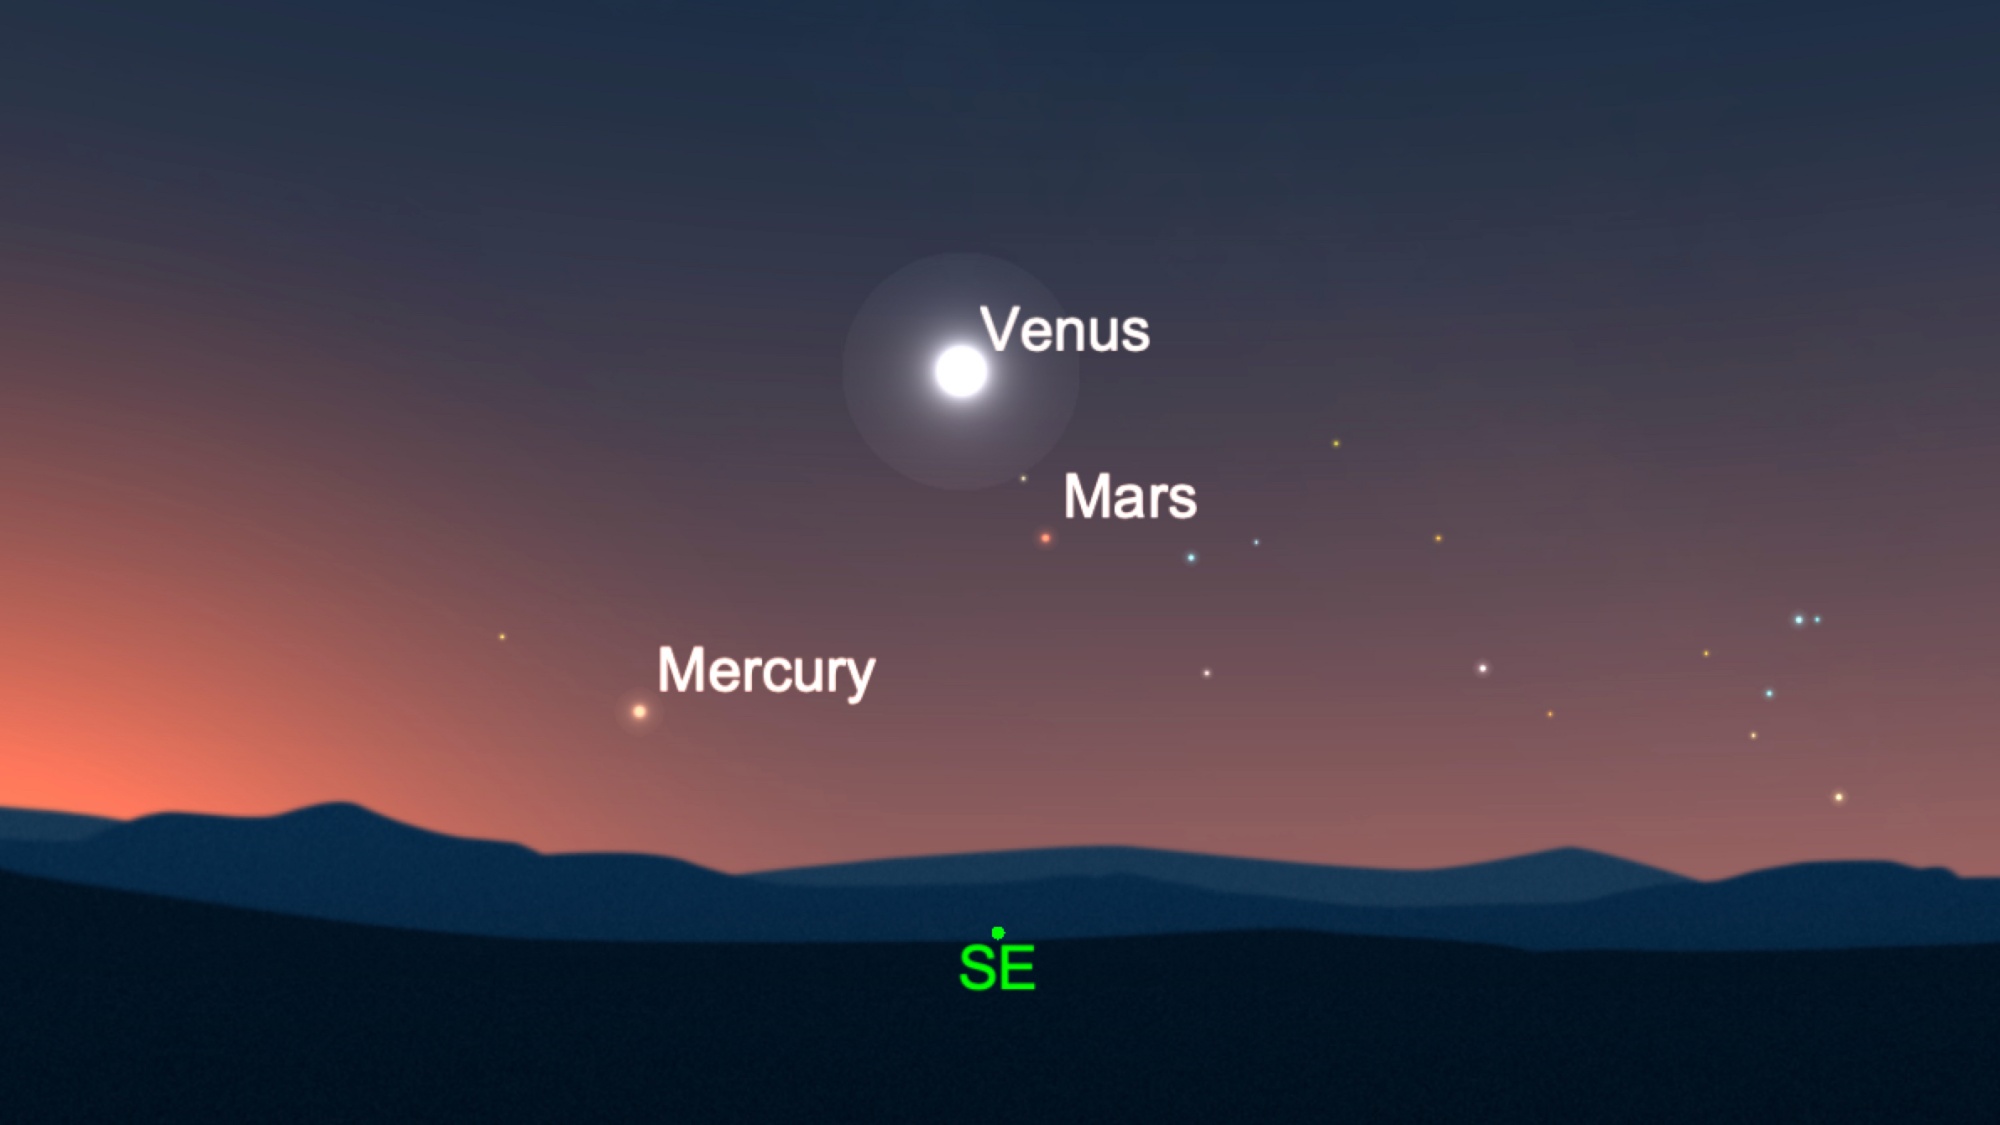 This sky map shows where Mercury, Venus and Mars will be visible in the morning sky on the day of the full moon.